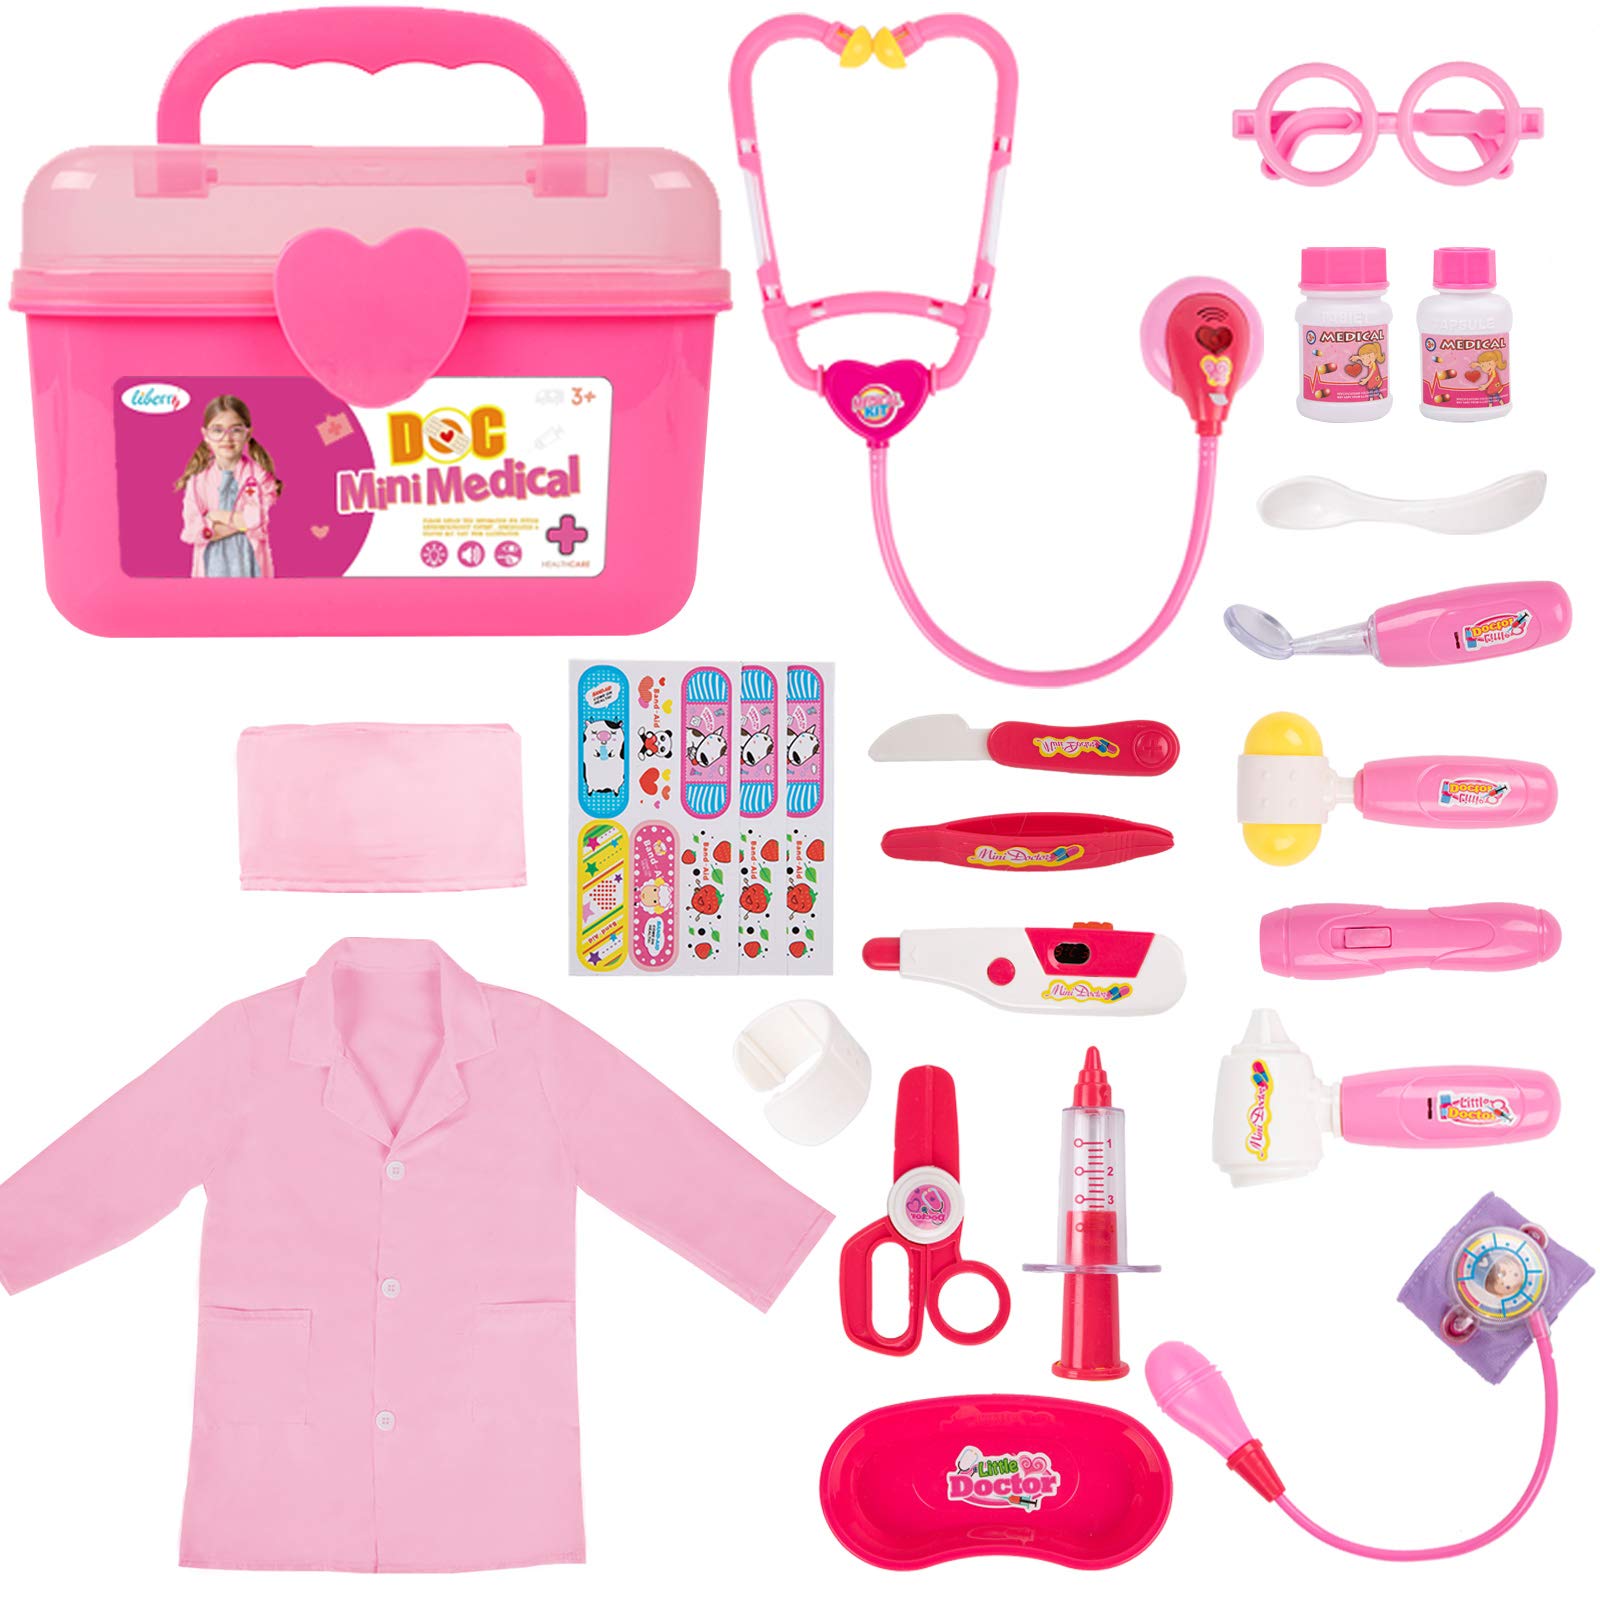 Durable Doctor Kit for Kids, 23 Pieces Pretend Play Educational Doctor Toys, Dentist Medical Kit with Stethoscope Doctor Role Play Costume, Doctor Set Toys for Toddler Girls 3 4 5 6 7 8 Years Old